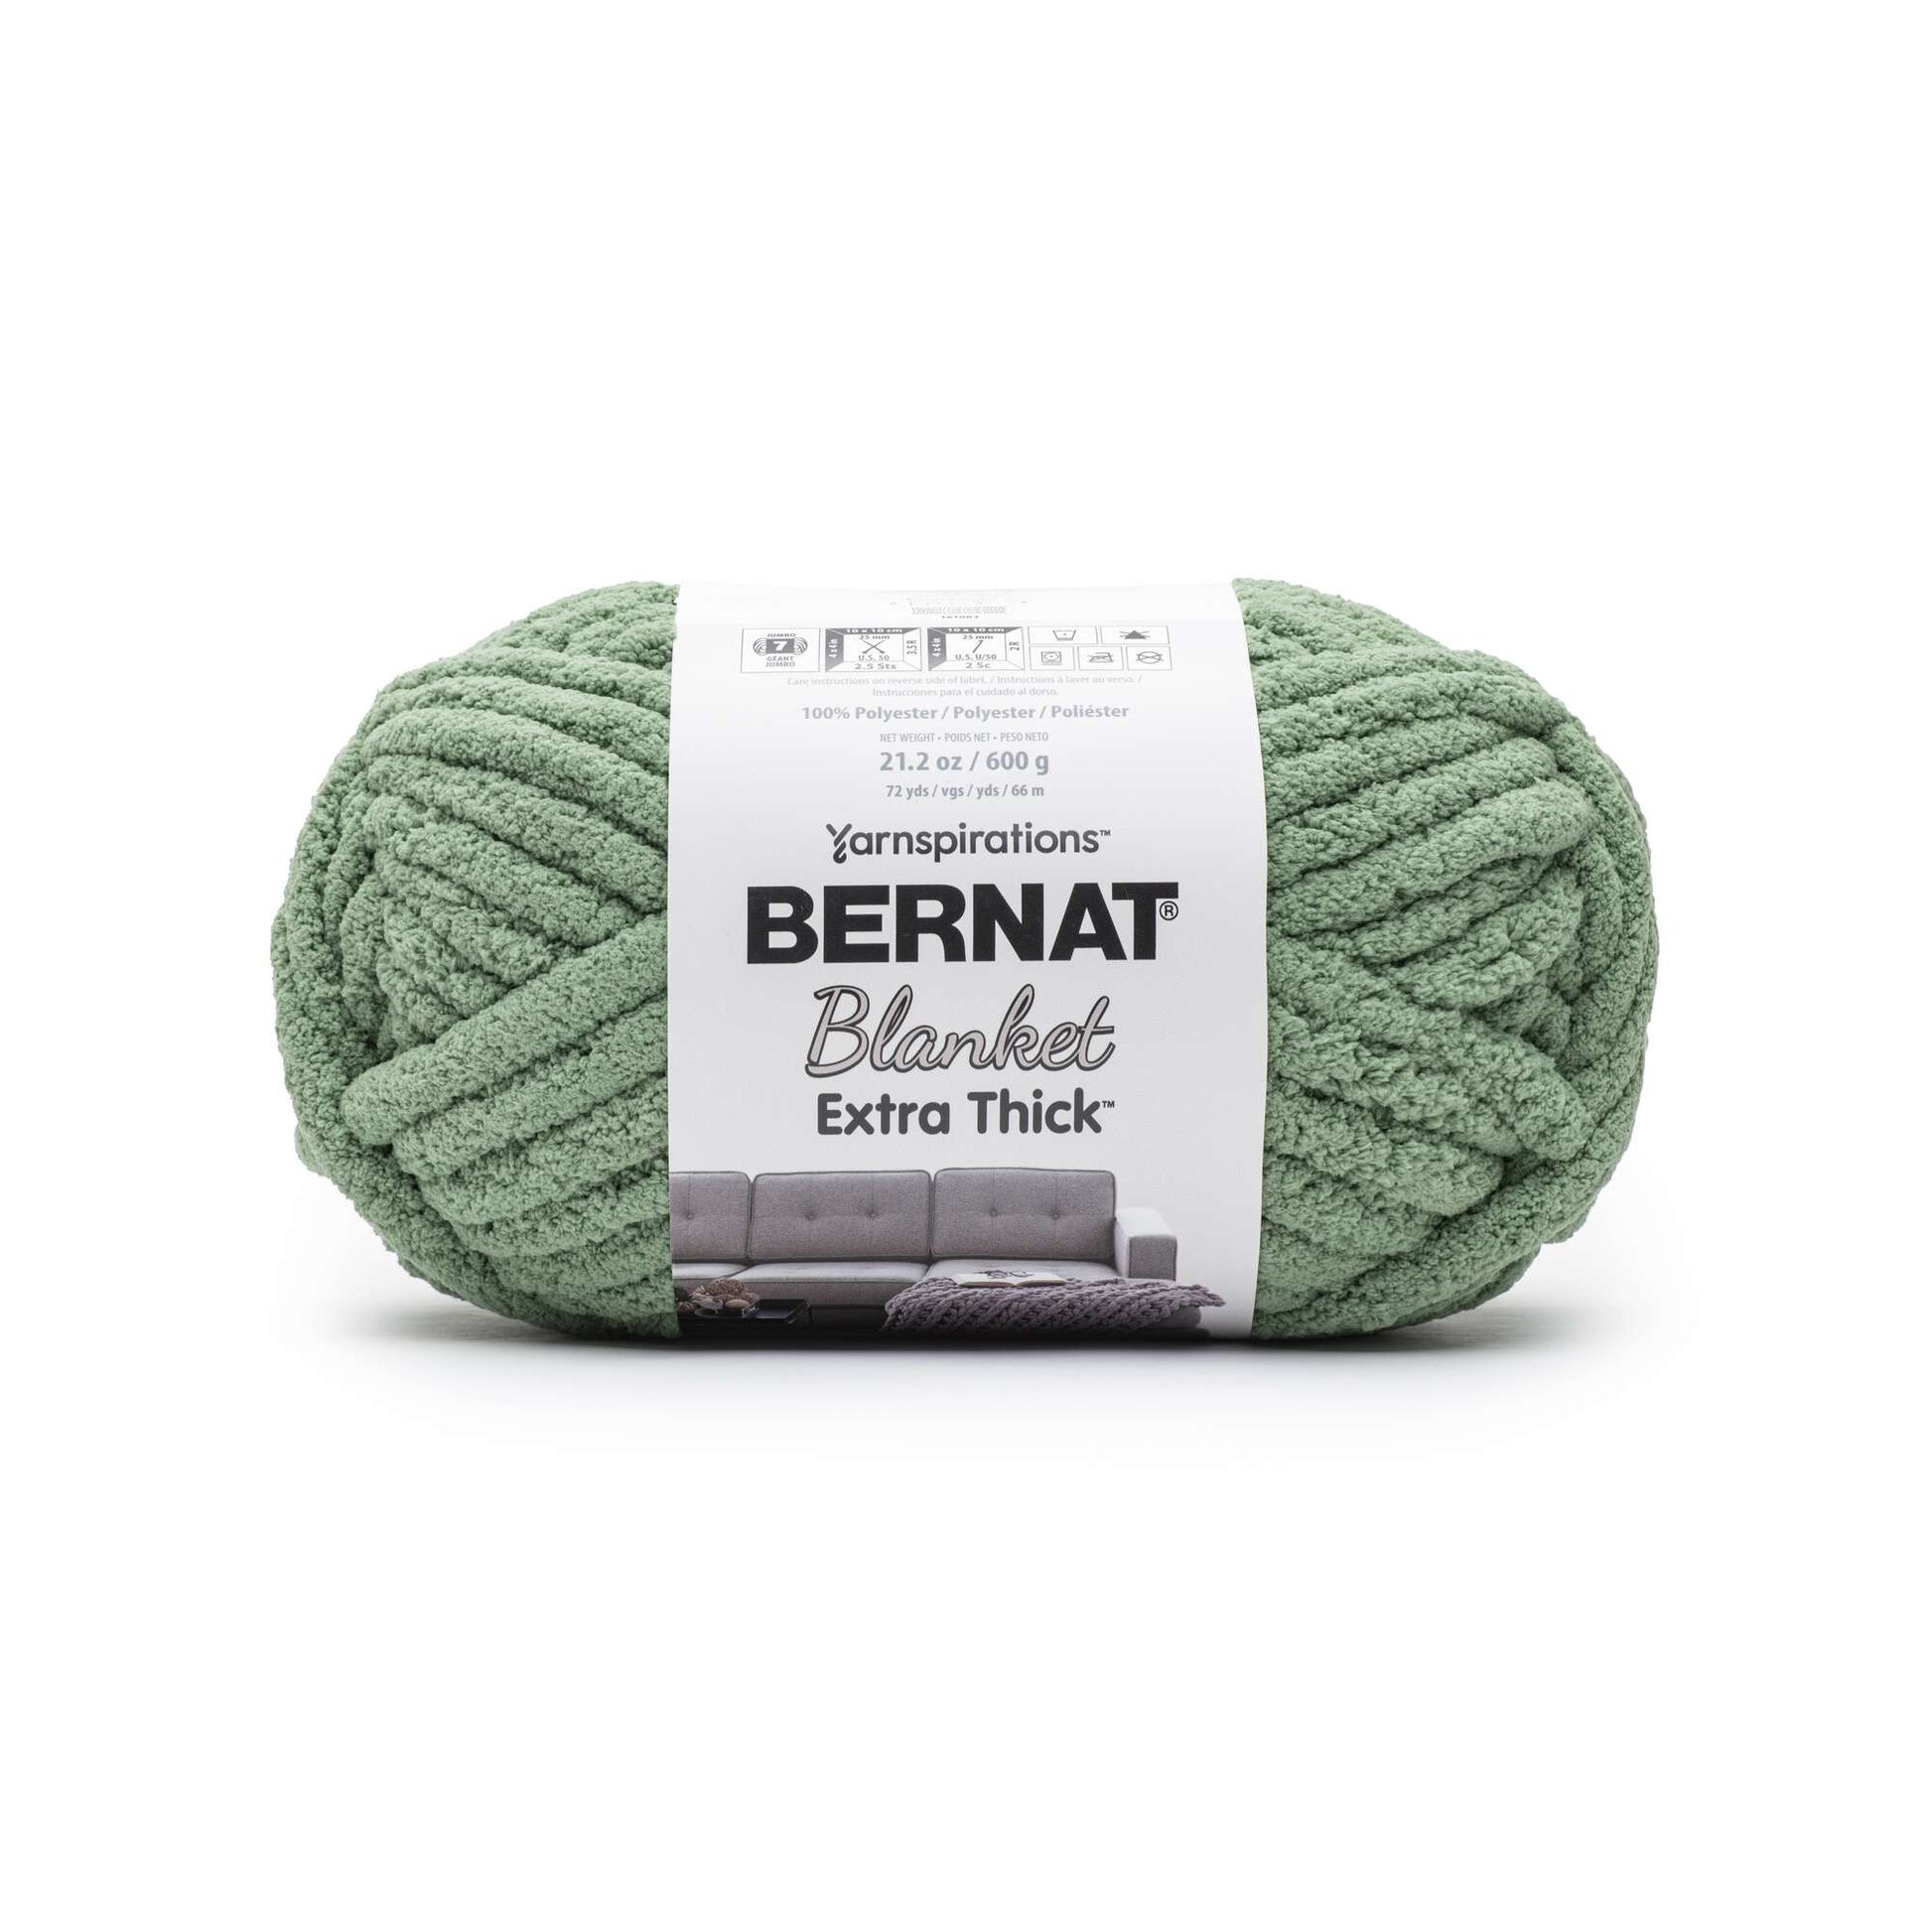 Bernat Blanket Extra Thick Yarn (600g/21.2oz) - Discontinued Shades Green Frost